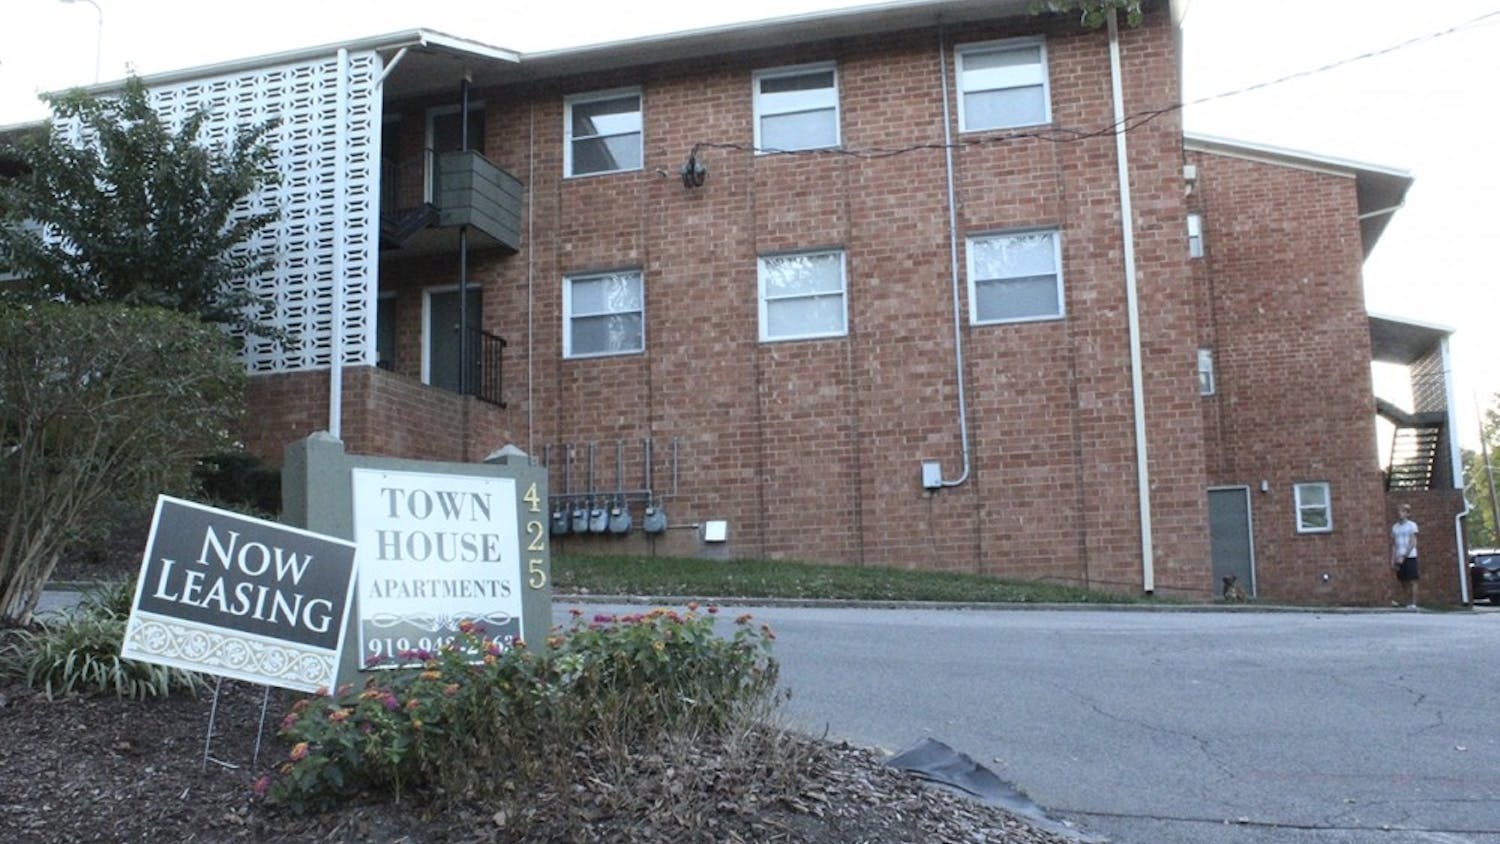 Town House Apartments, located on Hillsborough Rd, was a popular student apartment complex.